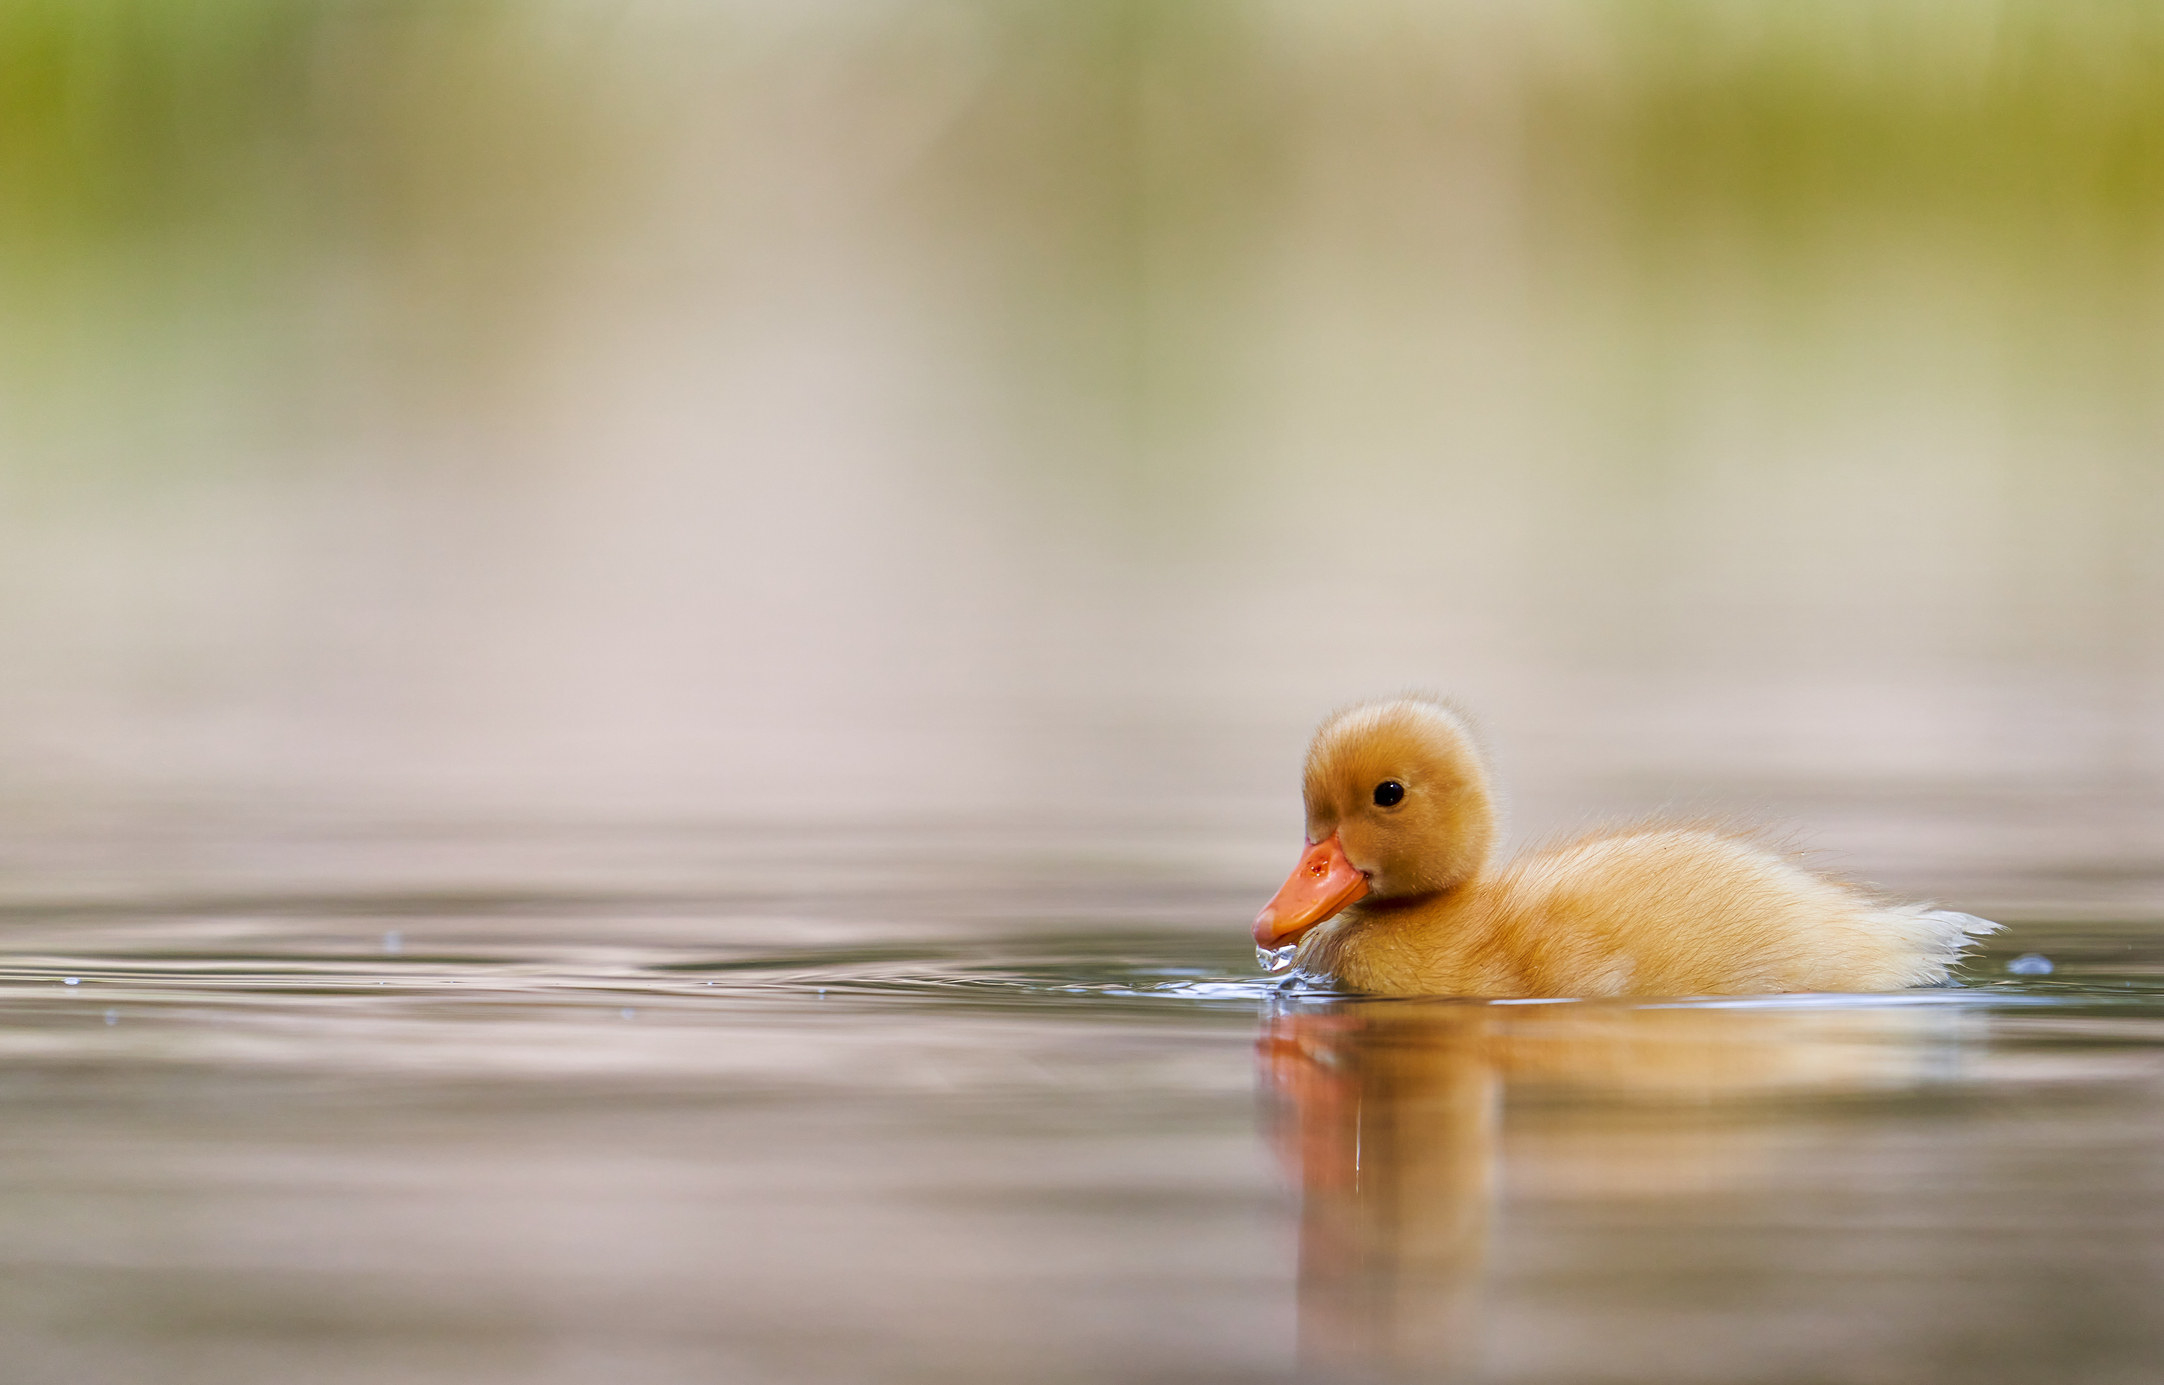 A duckling in the water